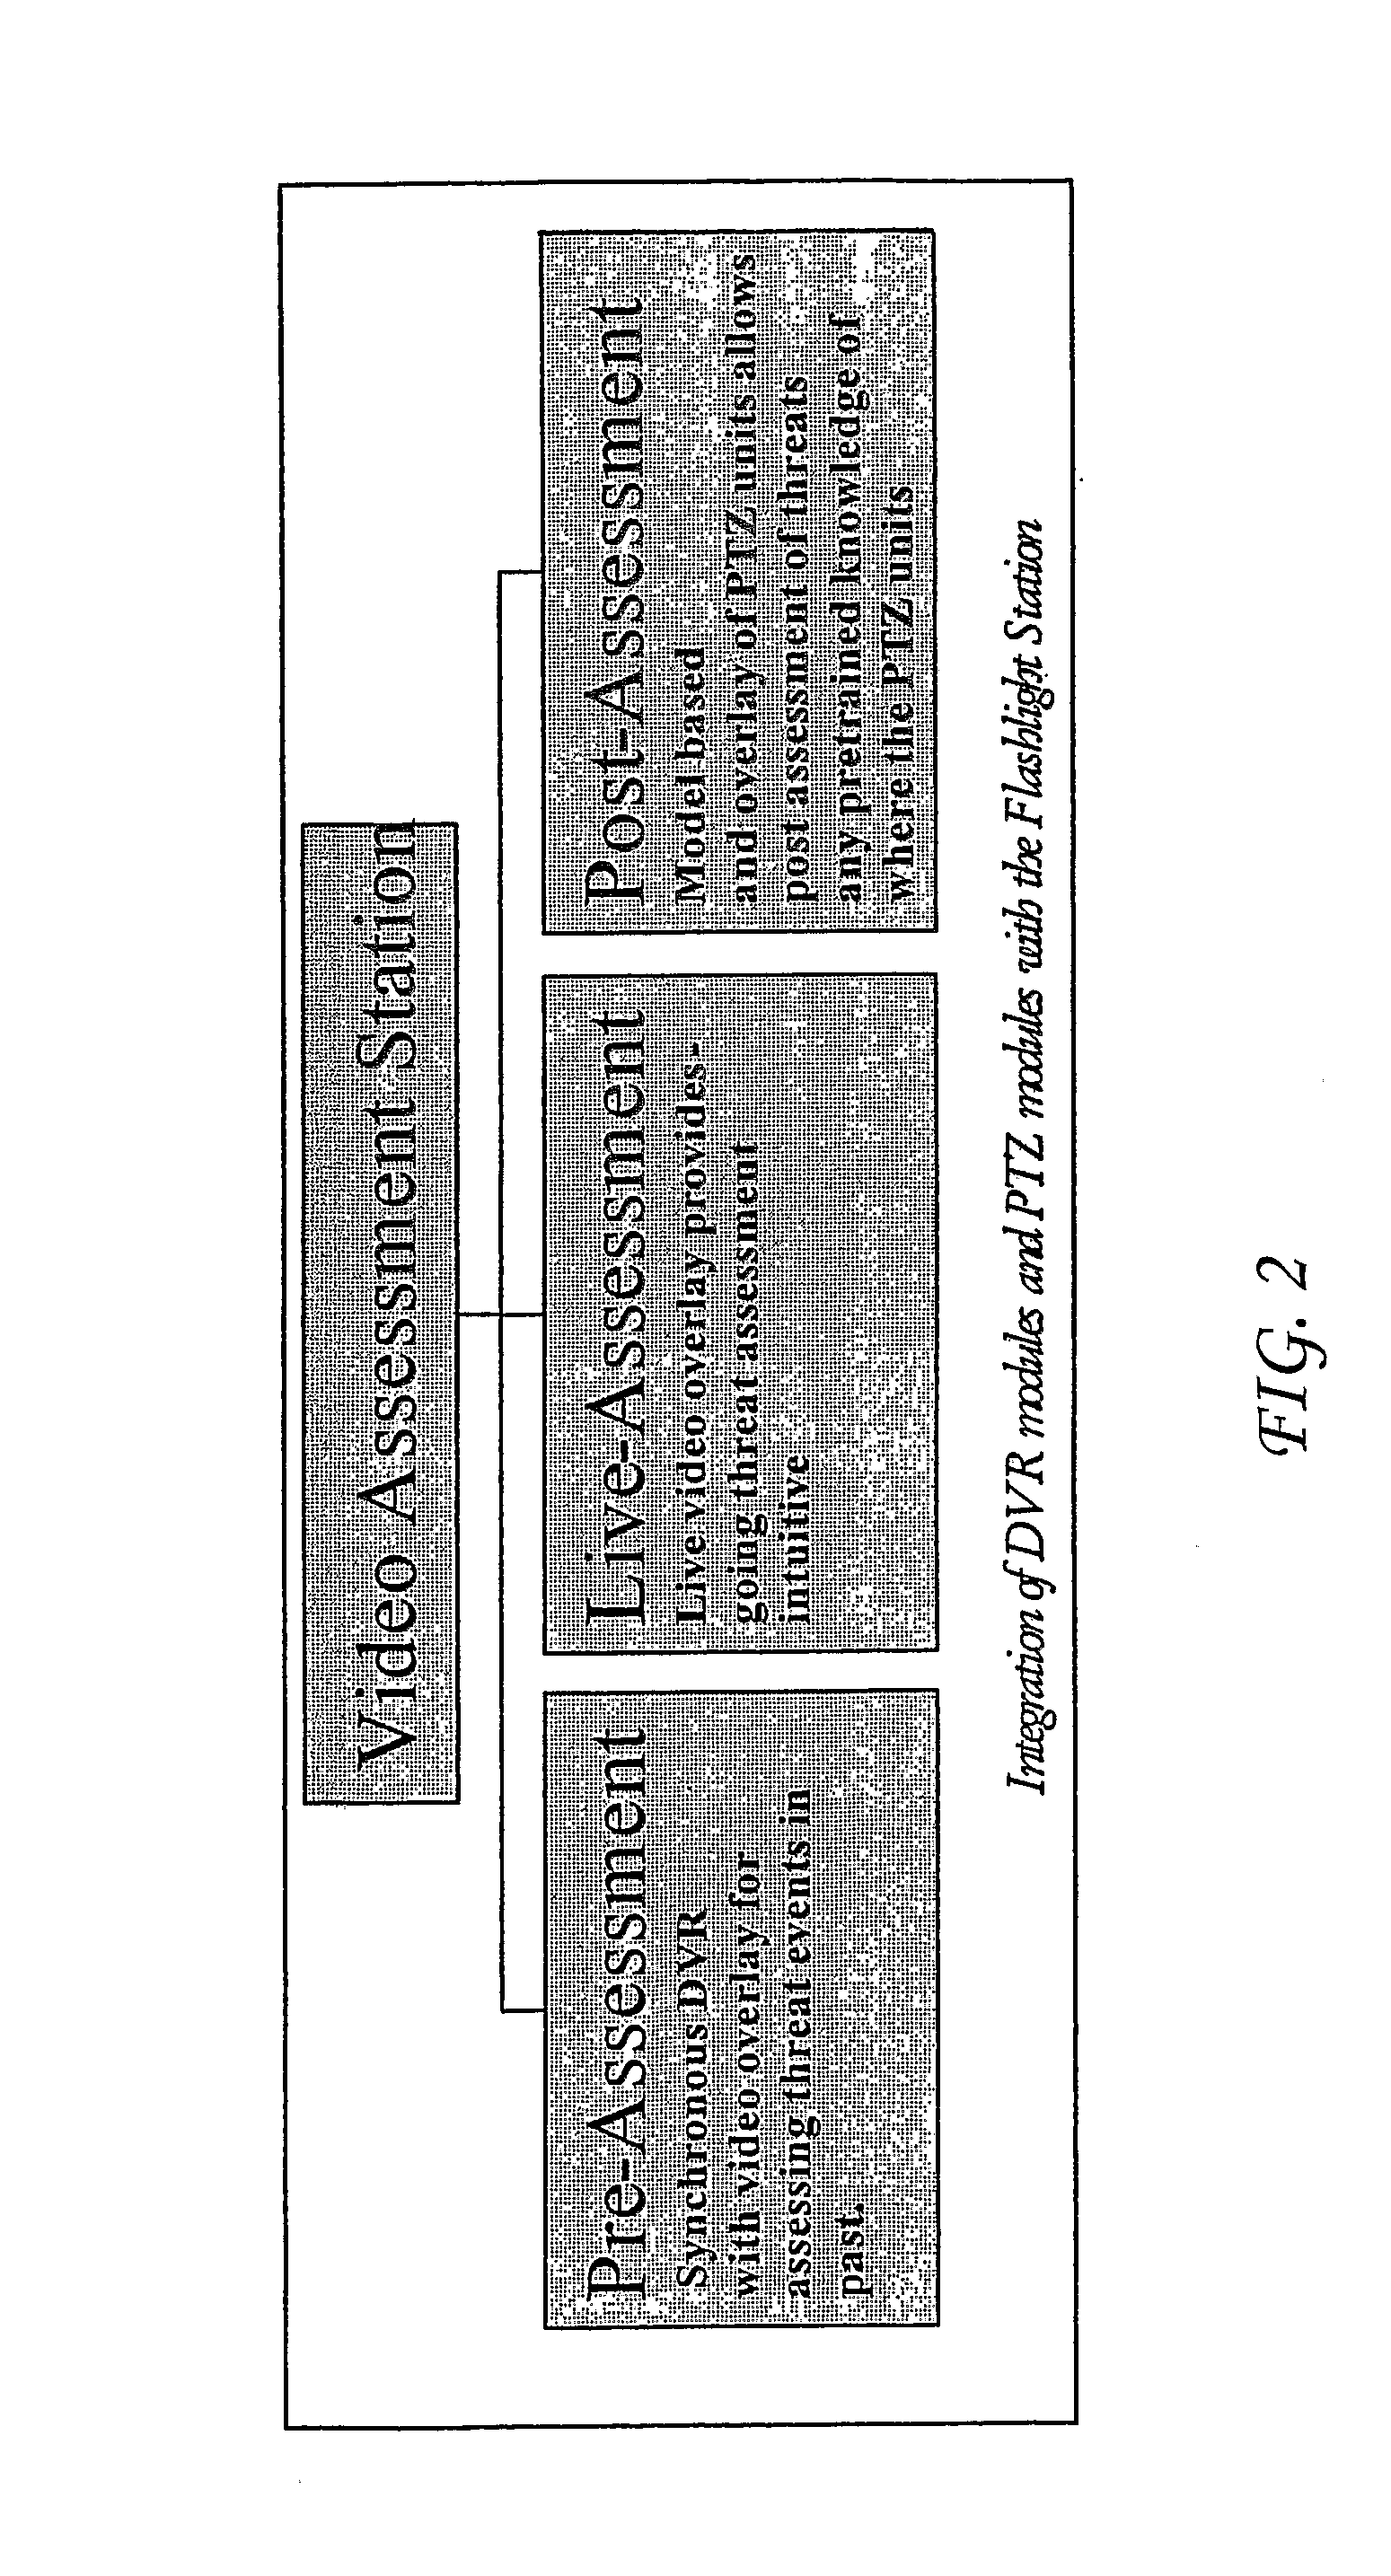 Method and System for Performing Video Flashlight